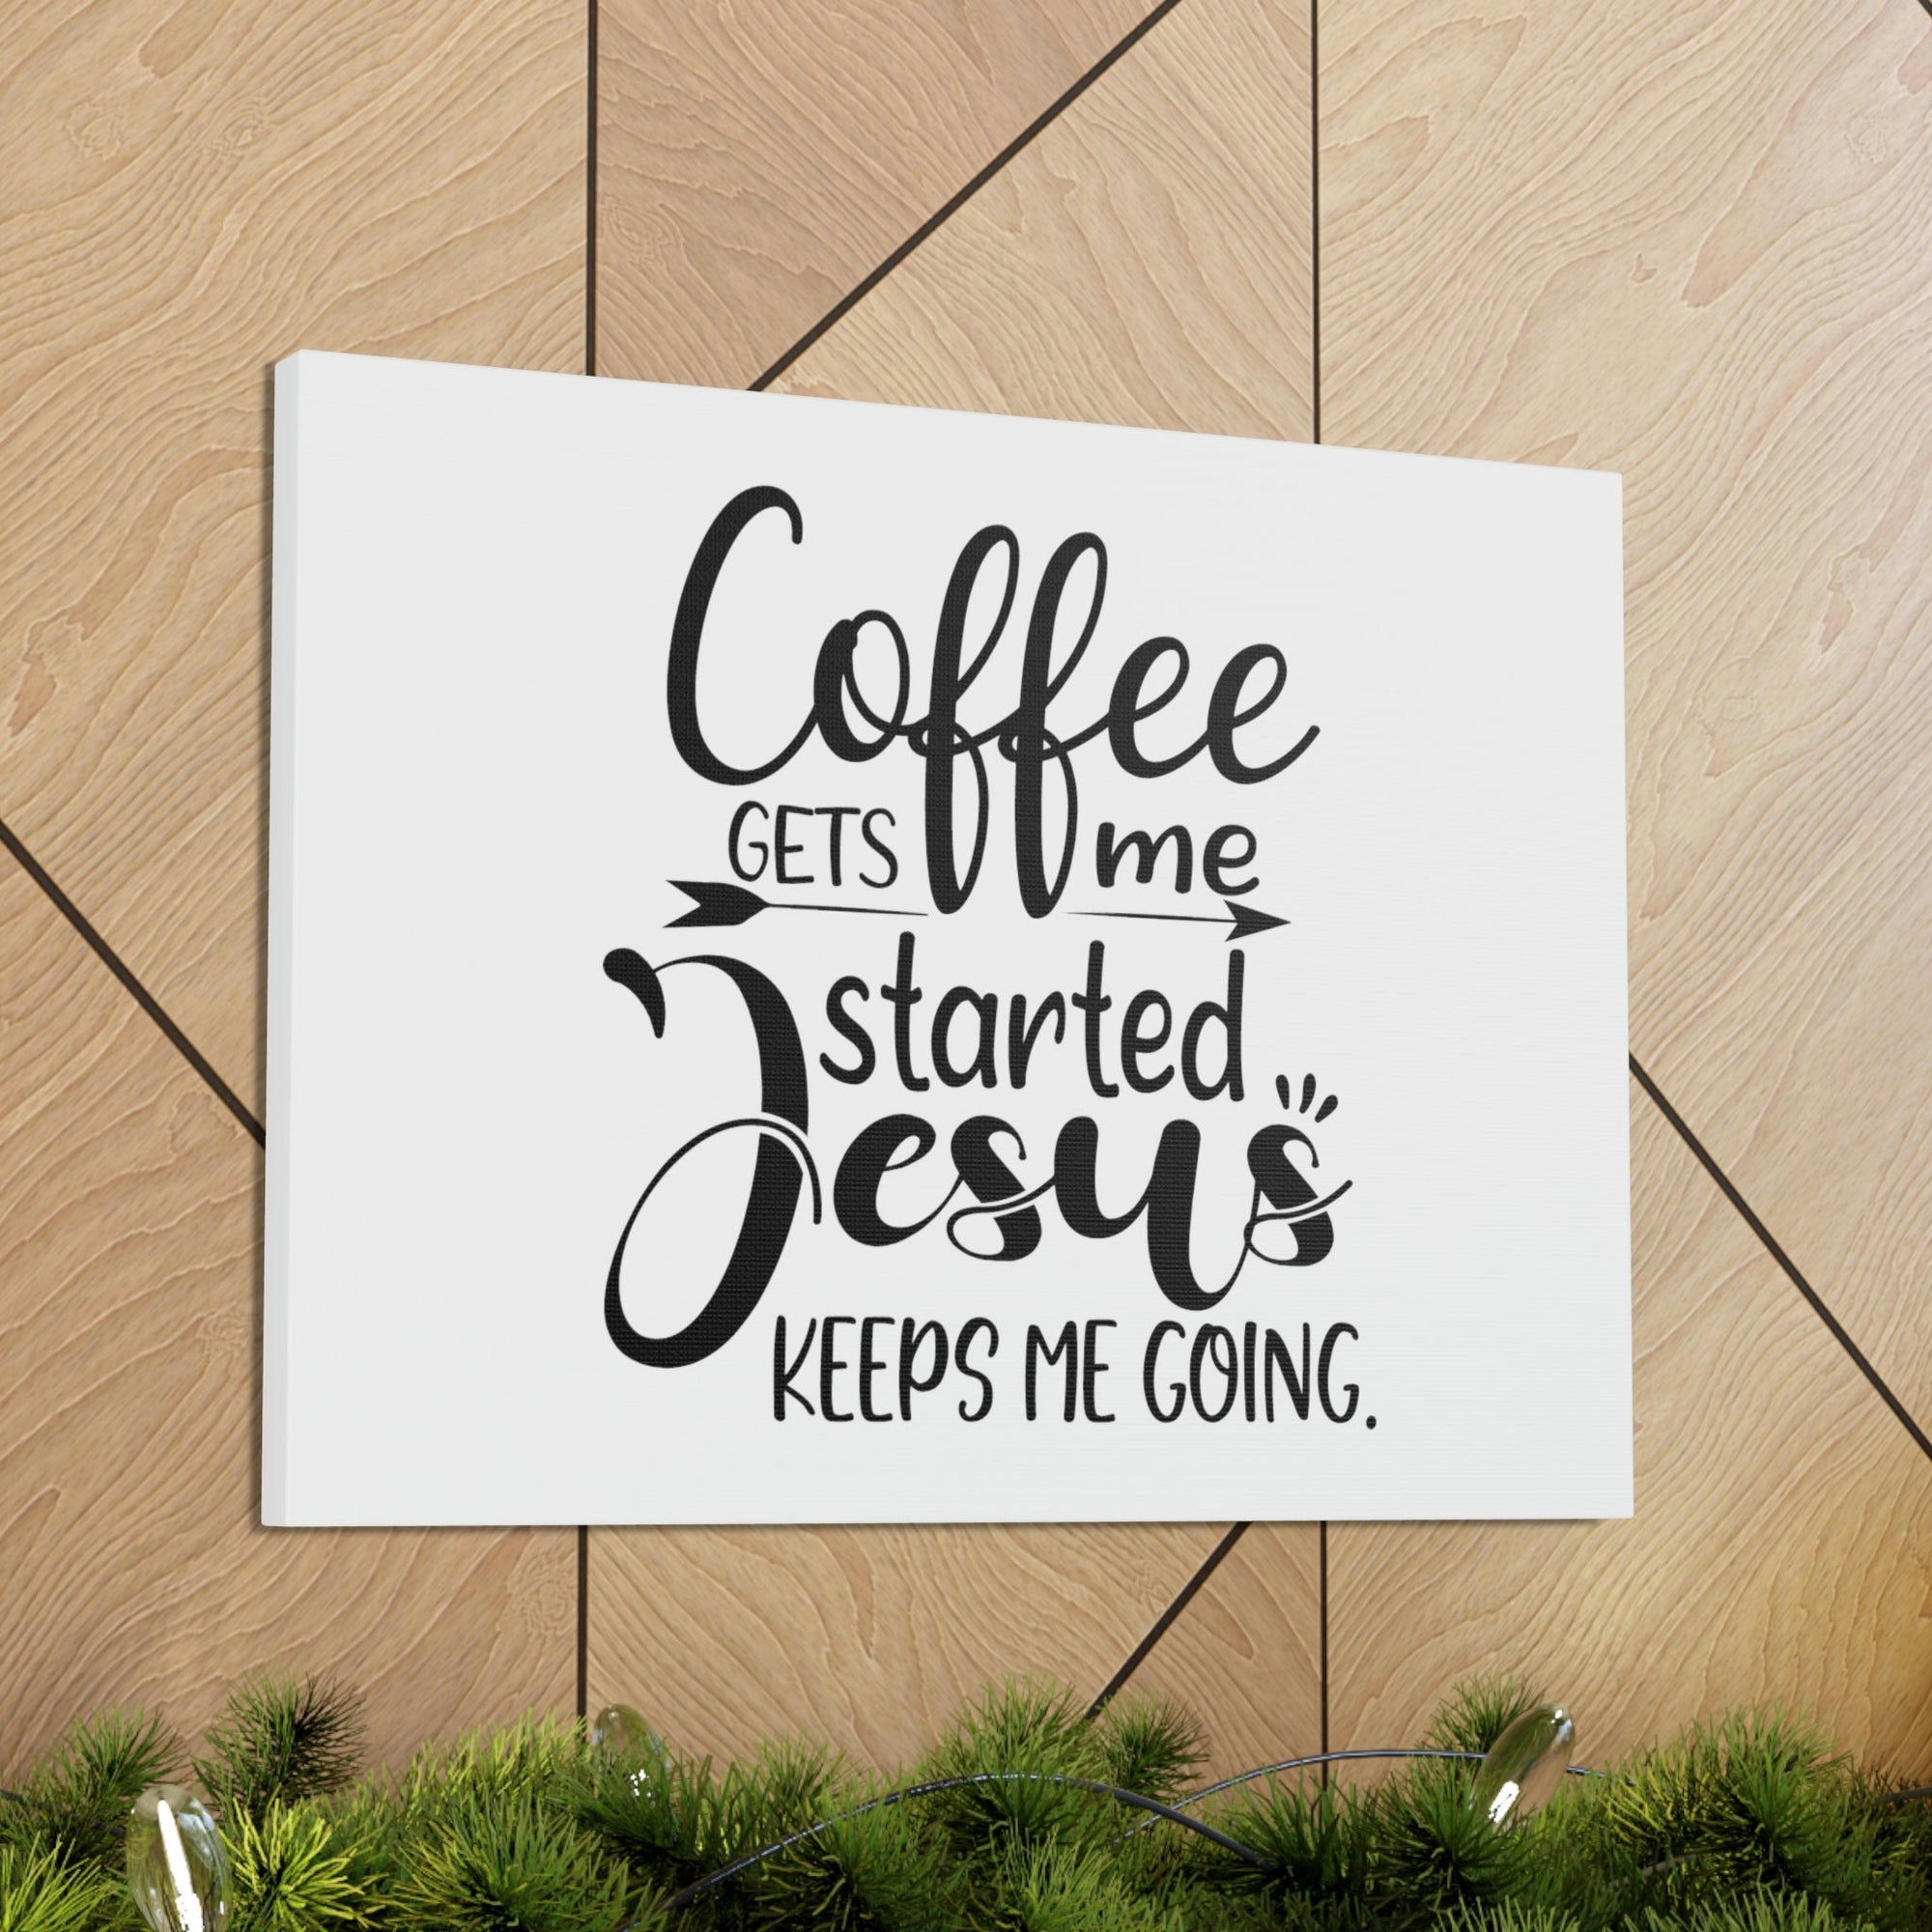 Scripture Walls Jesus Keeps Me Going Philippians 4:19 Christian Wall Art Bible Verse Print Ready to Hang Unframed-Express Your Love Gifts